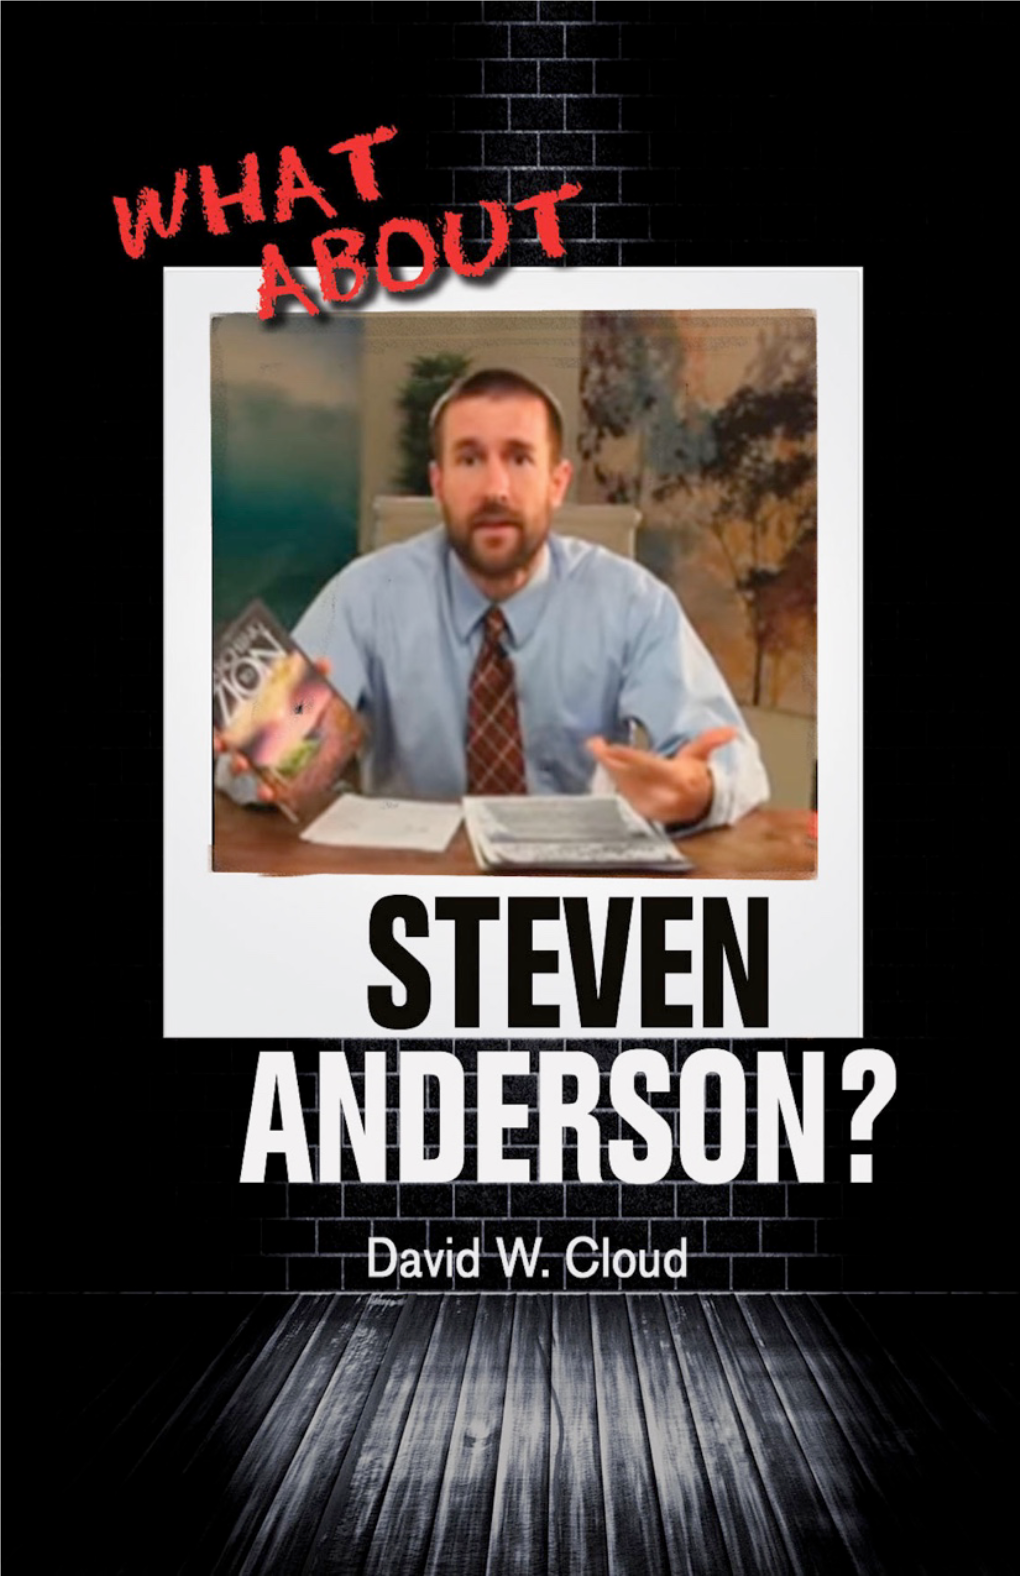 Who Is Steven Anderson?